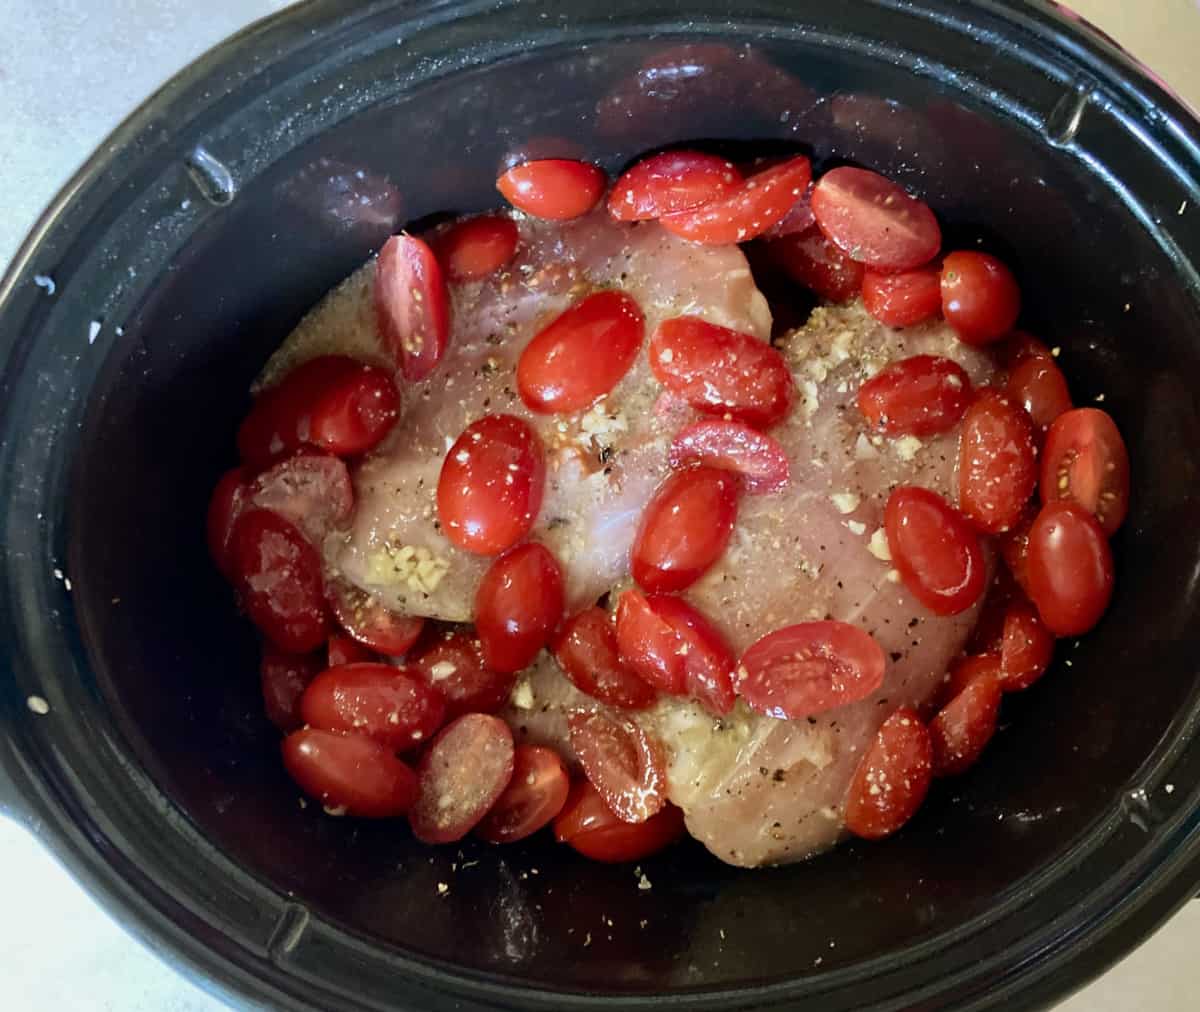 Seasoned chicken breasts topped with tomatoes and broth in black crock pot.